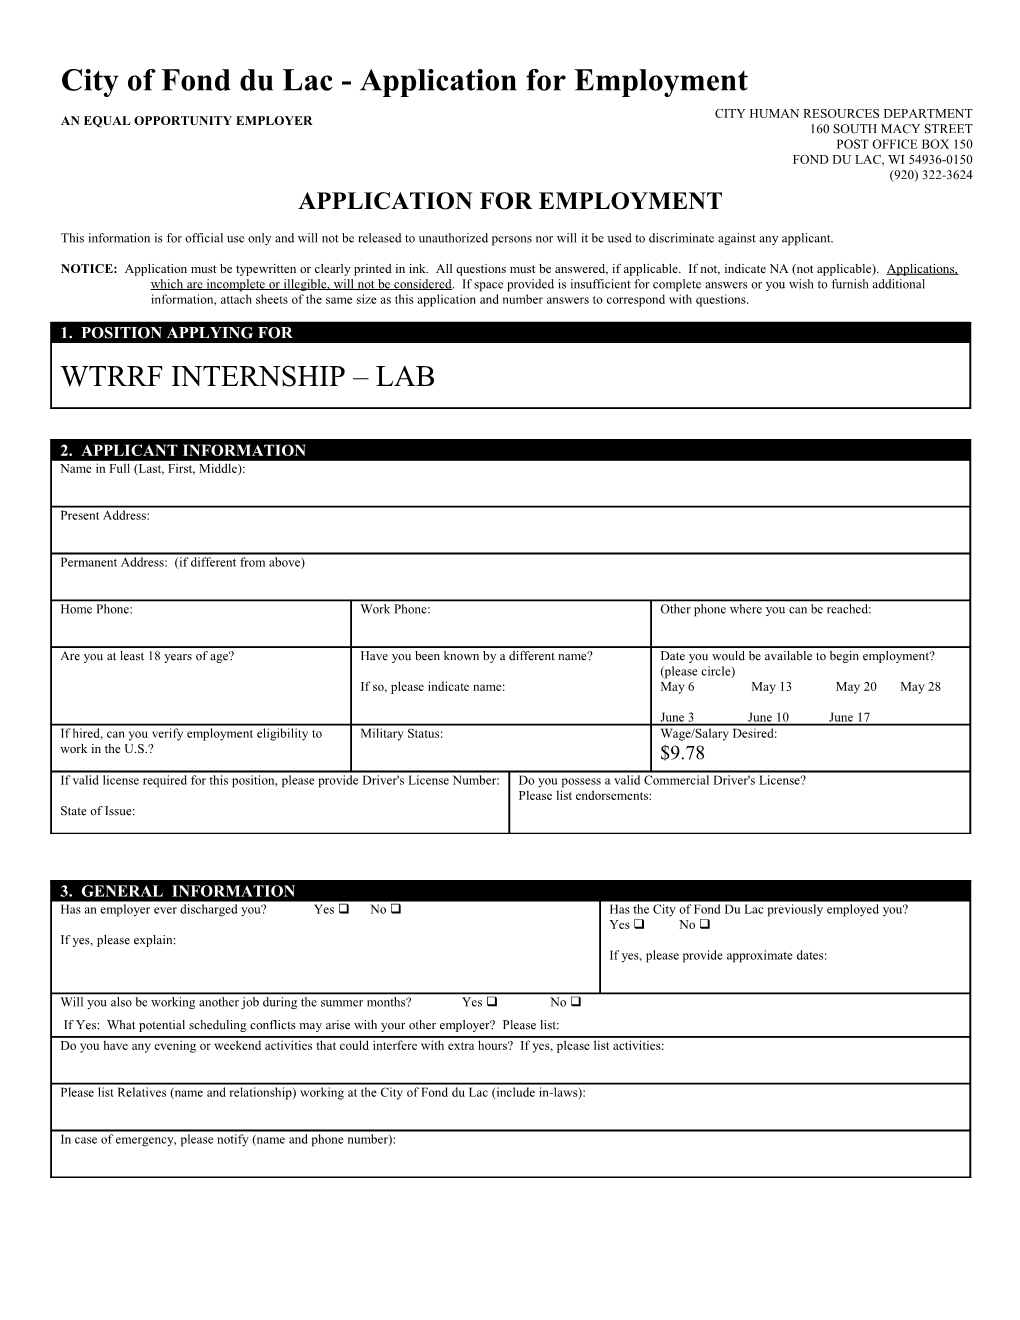 Application for Employment s148